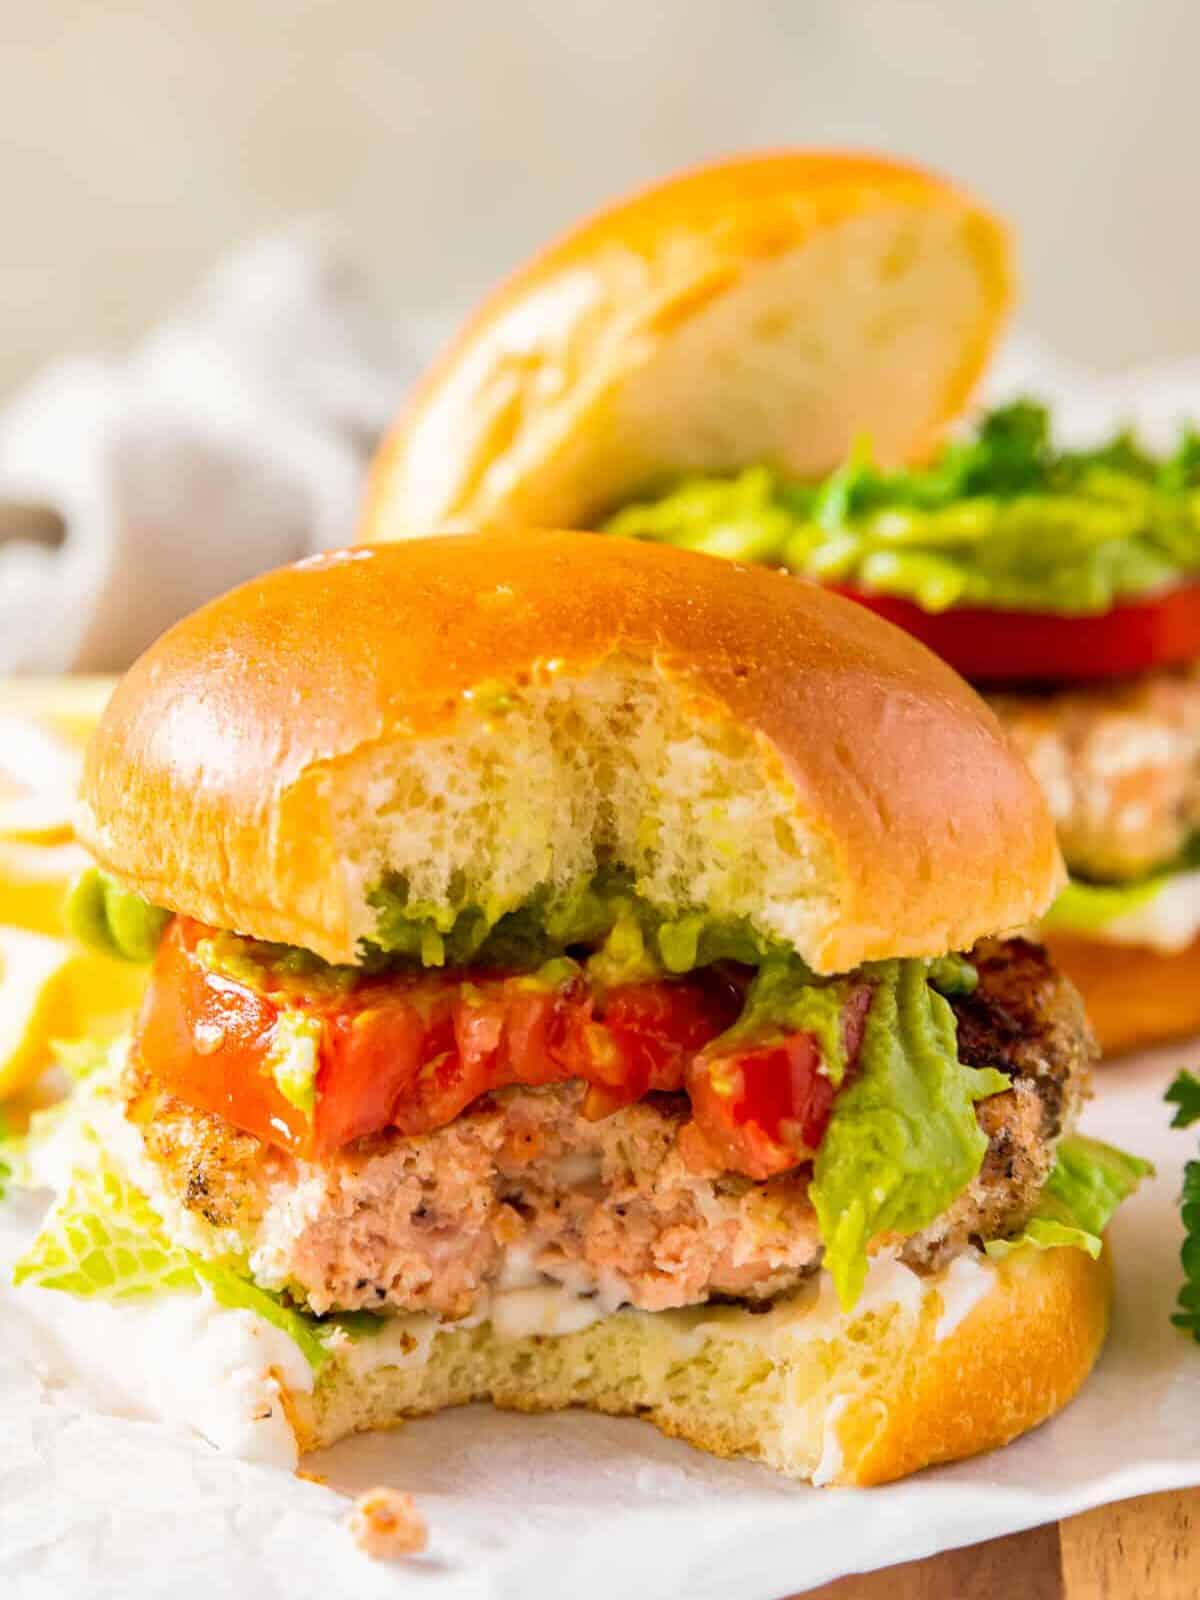 salmon burger on a bun with lettuce and tomato with a bite taken from it